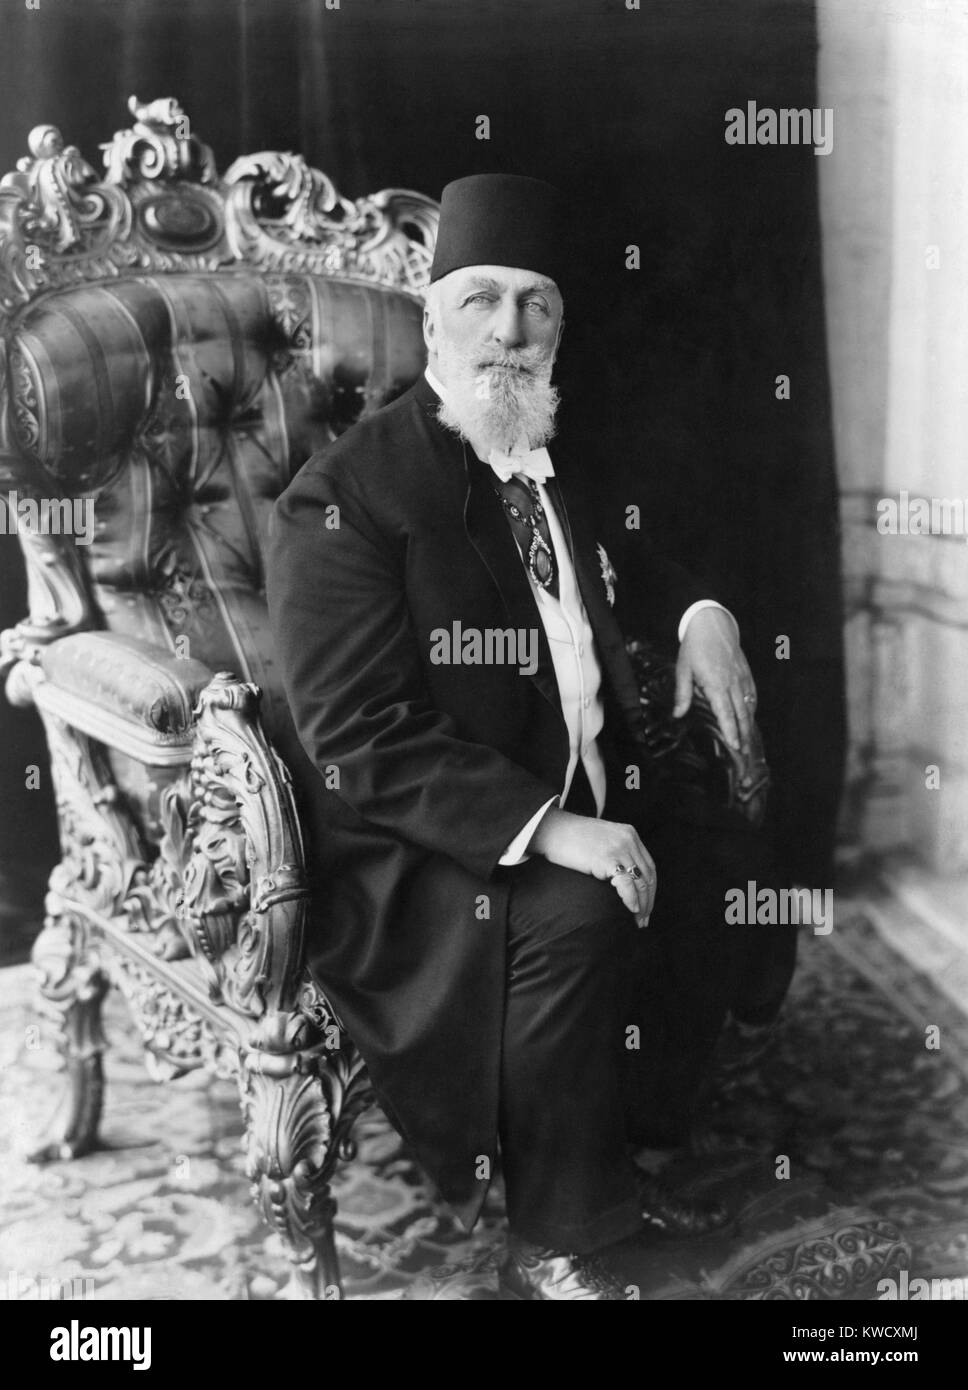 Ottoman Sultan Mehmed VI succeeded his dead brother, Mehmed V, in 1918. He reigned though the defeat of the Central Powers, which included Turkey, and the harsh peace settlement of the 1920 Treaty of Sevres. His reign ended in 1922 when the Turkish Grand (BSLOC 2017 1 105) Stock Photo